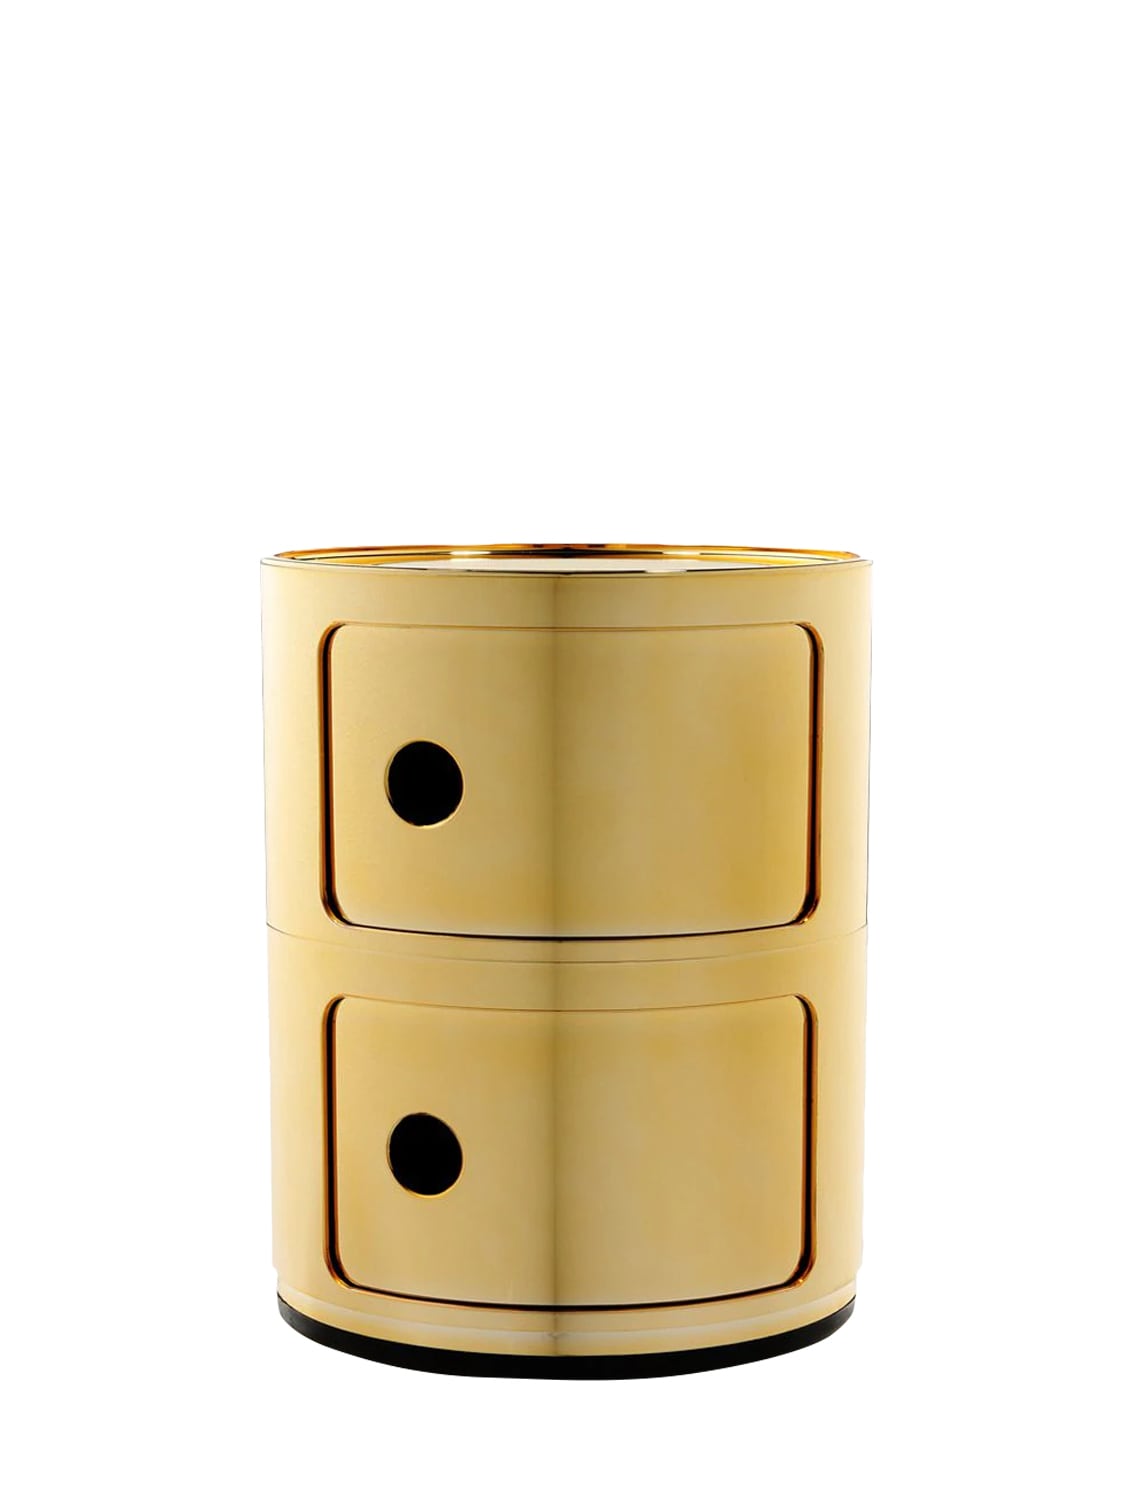 Kartell Componibili Storage Unit In Gold | ModeSens